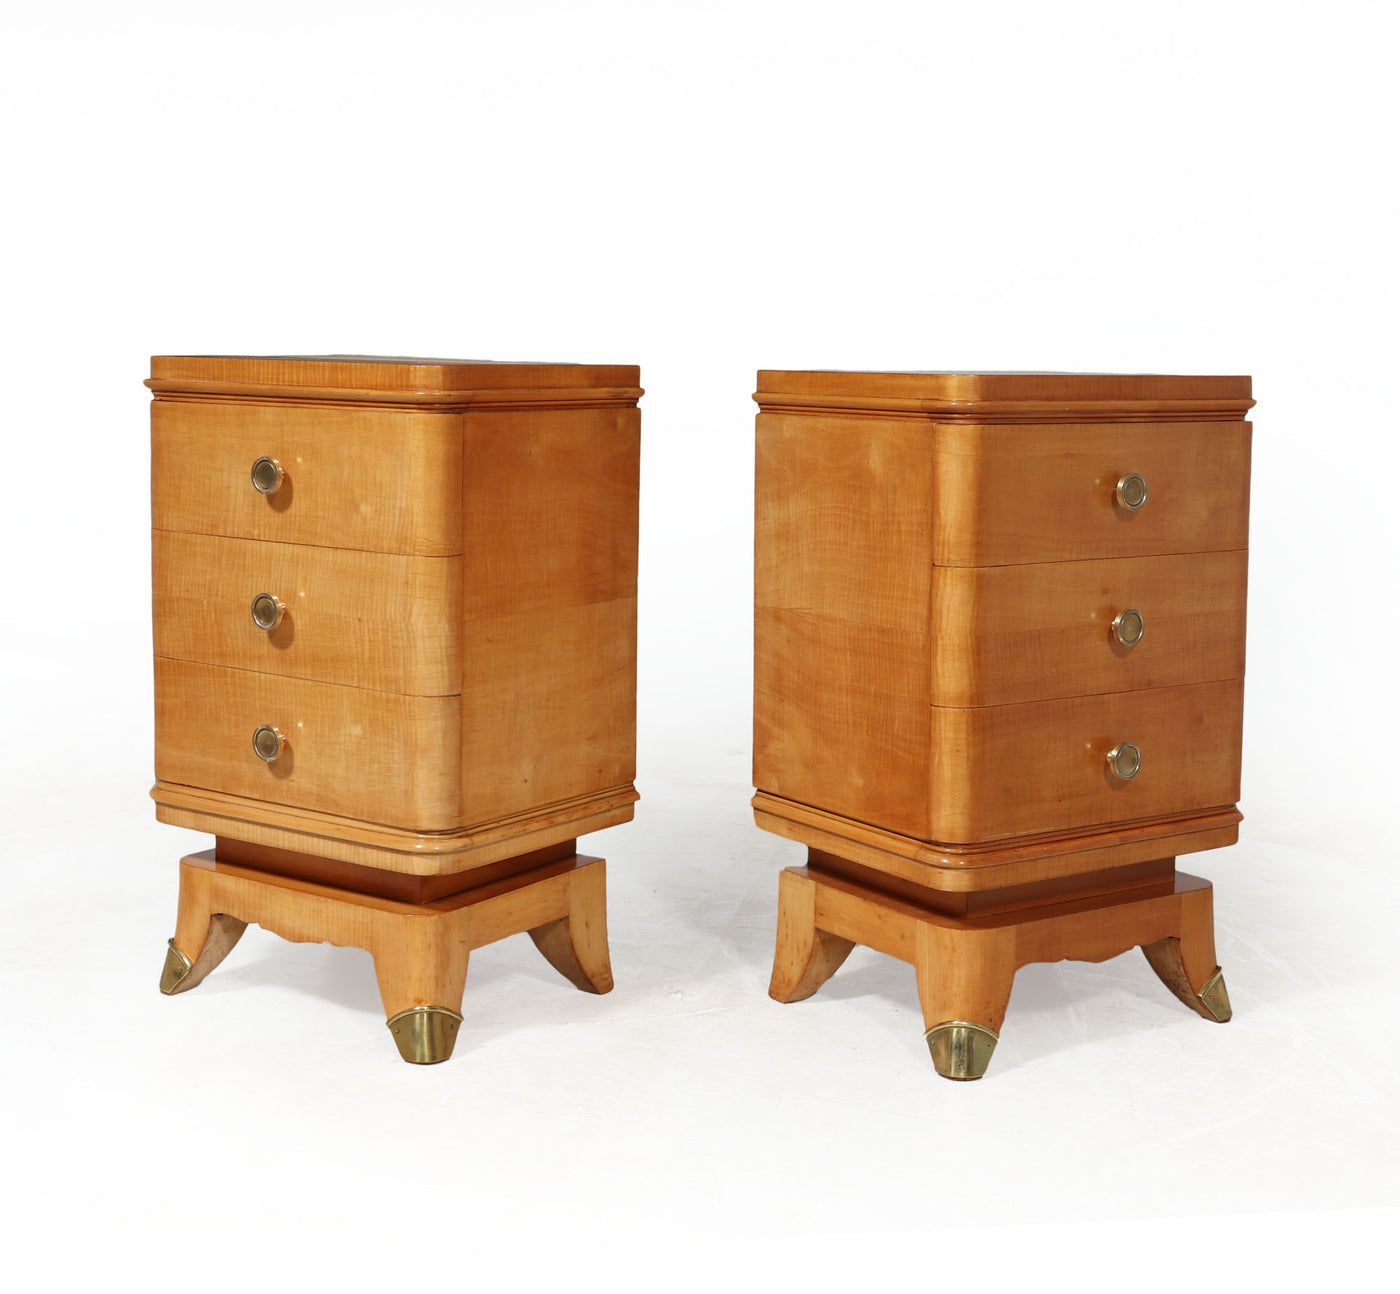 Pair of French Art Deco Bedside Chests in Sycamore side]